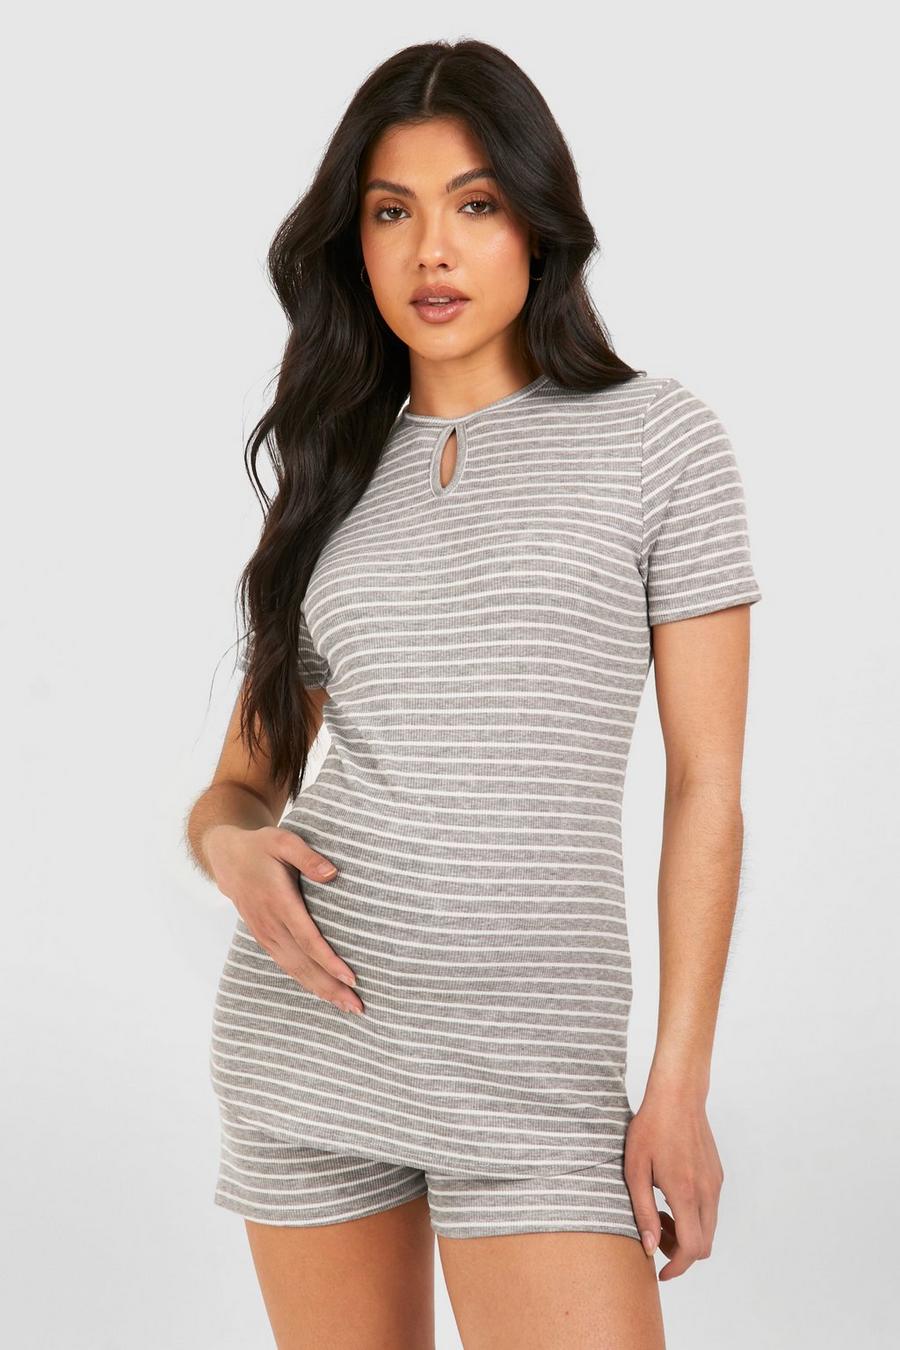 Grey All Occasion Dresses